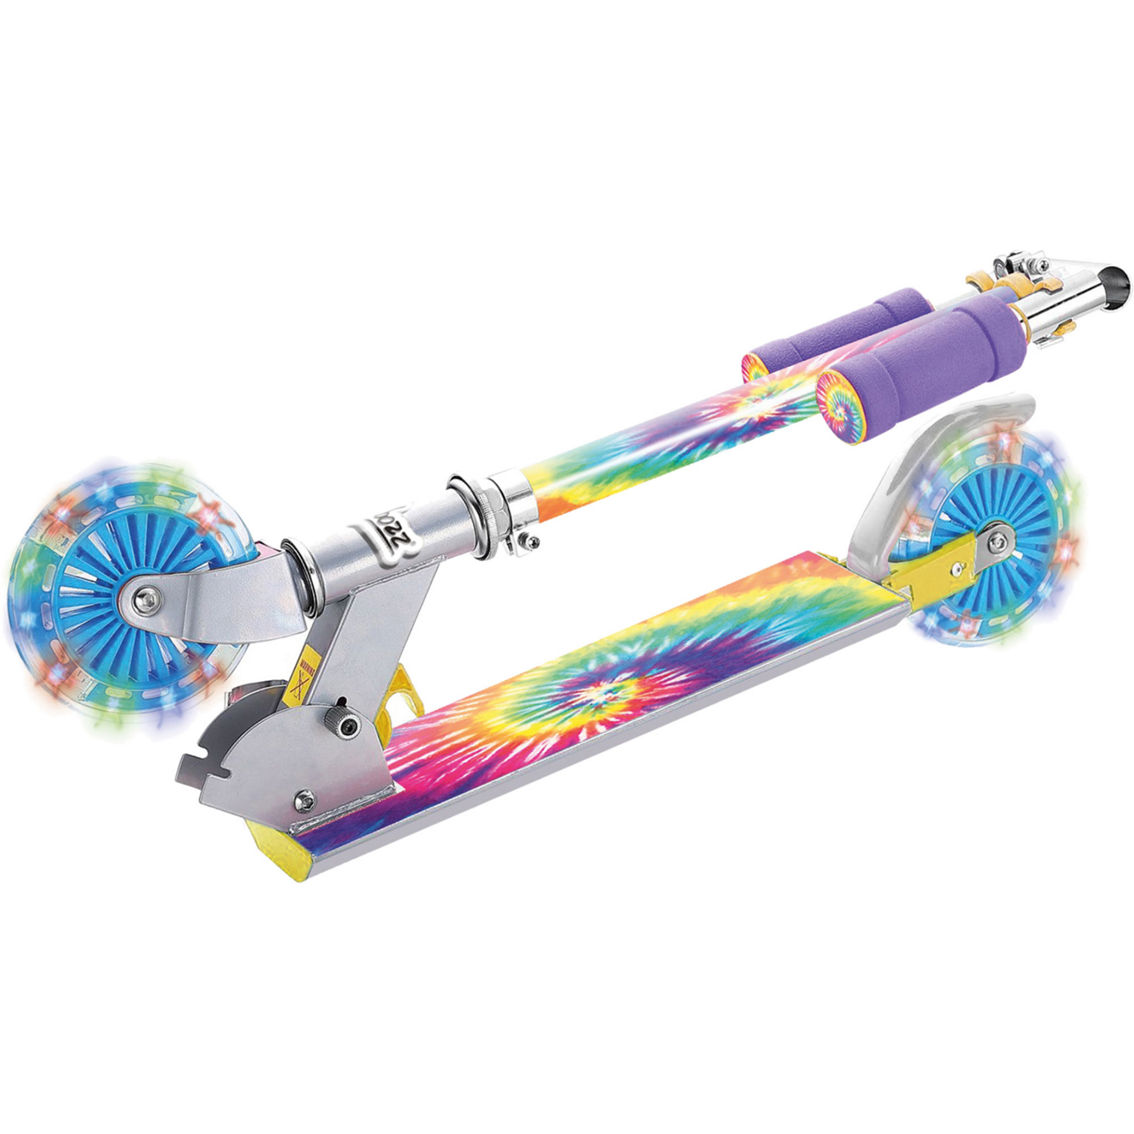 Tie Dye Scooter with Flashing Wheels - Image 3 of 5